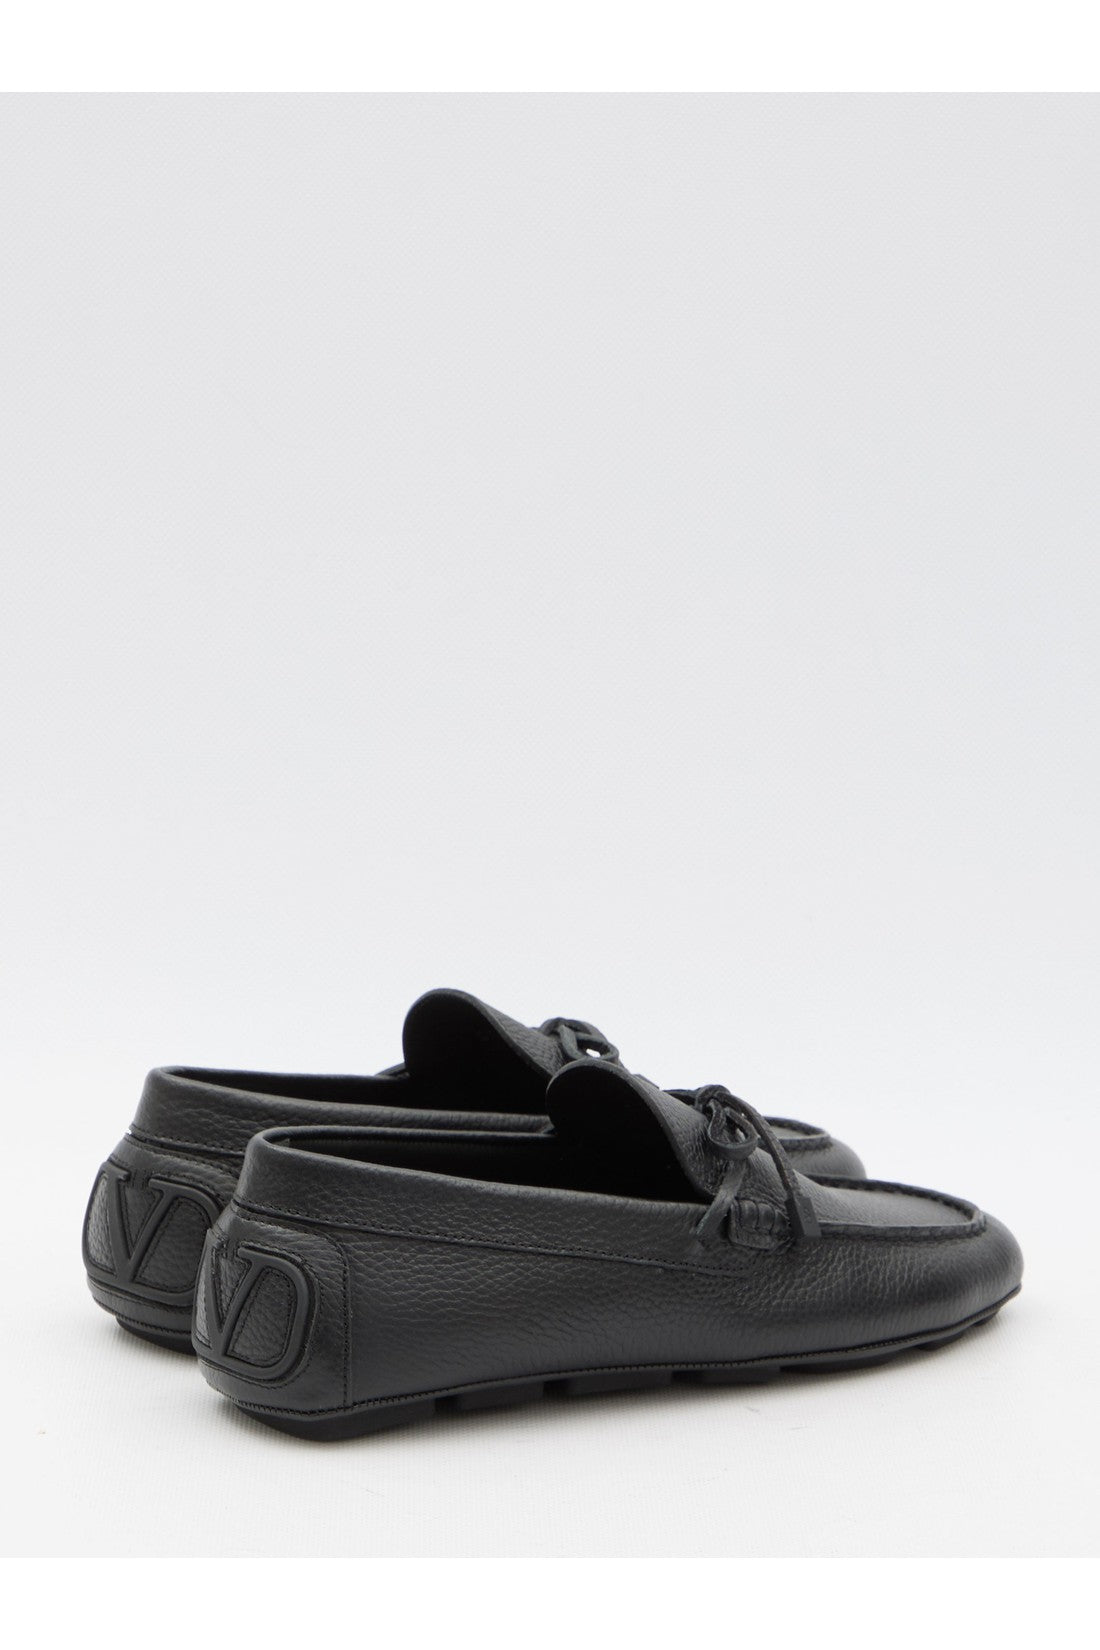 VLogo Signature Driving loafers